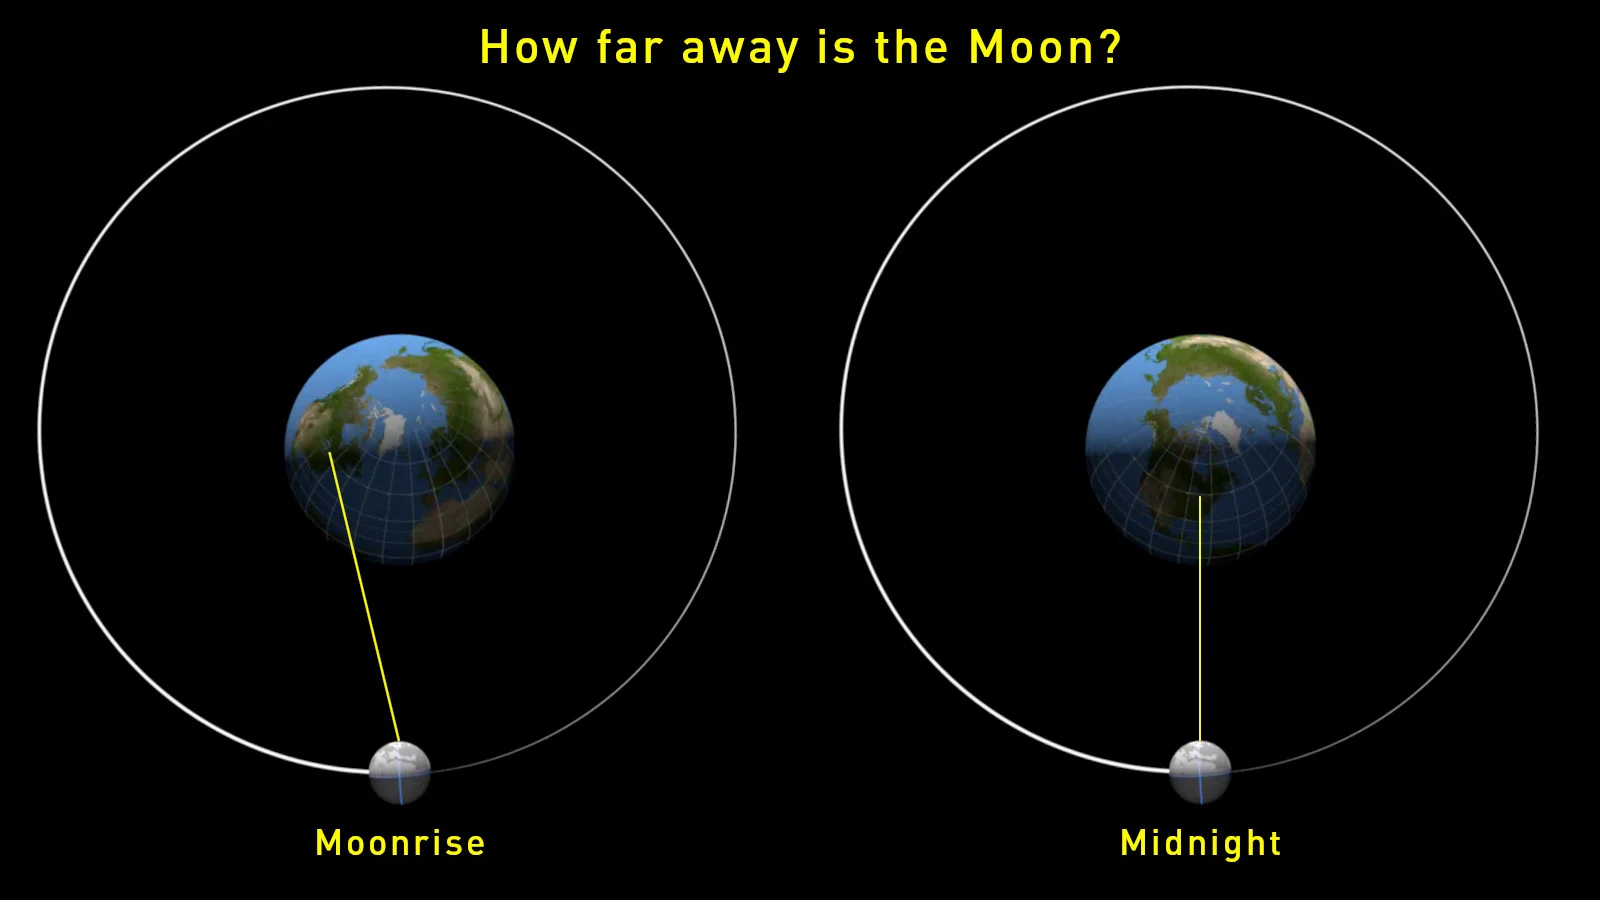 Moon Illusion - Distance between Moonrise and Midnight